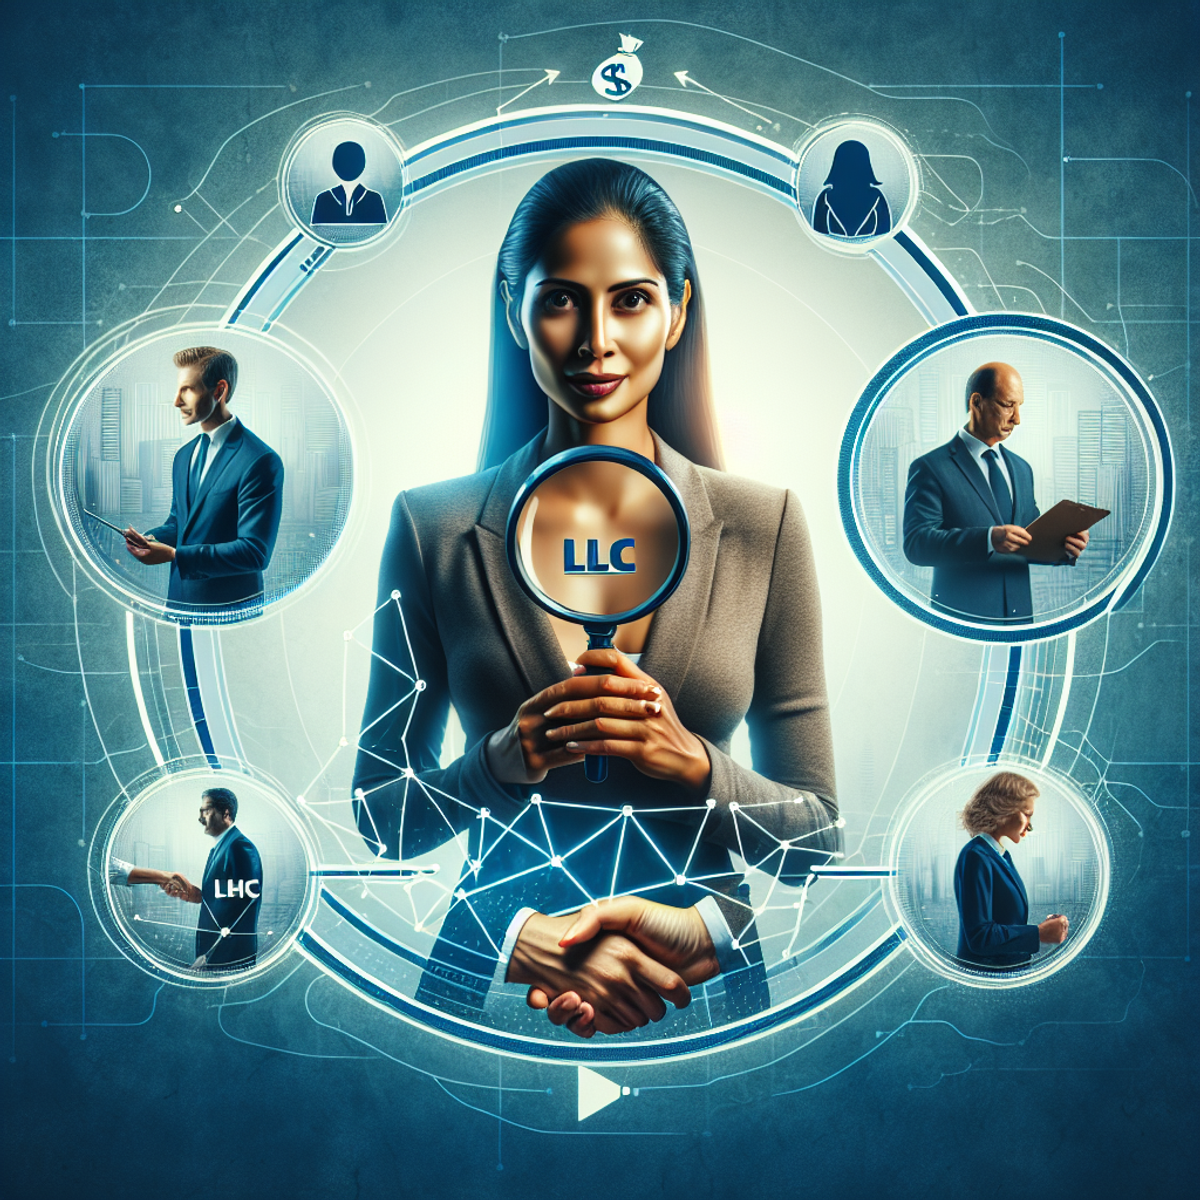 A South Asian woman holding a magnifying glass, surrounded by metaphorical symbols representing various business models. To her left, a solo entrepreneur stands alone, focused on her work. To her right, two Caucasian men shake hands to indicate a partnership. Instead of an LLC logo, a small team of Hispanic and Middle-Eastern individuals work collaboratively.